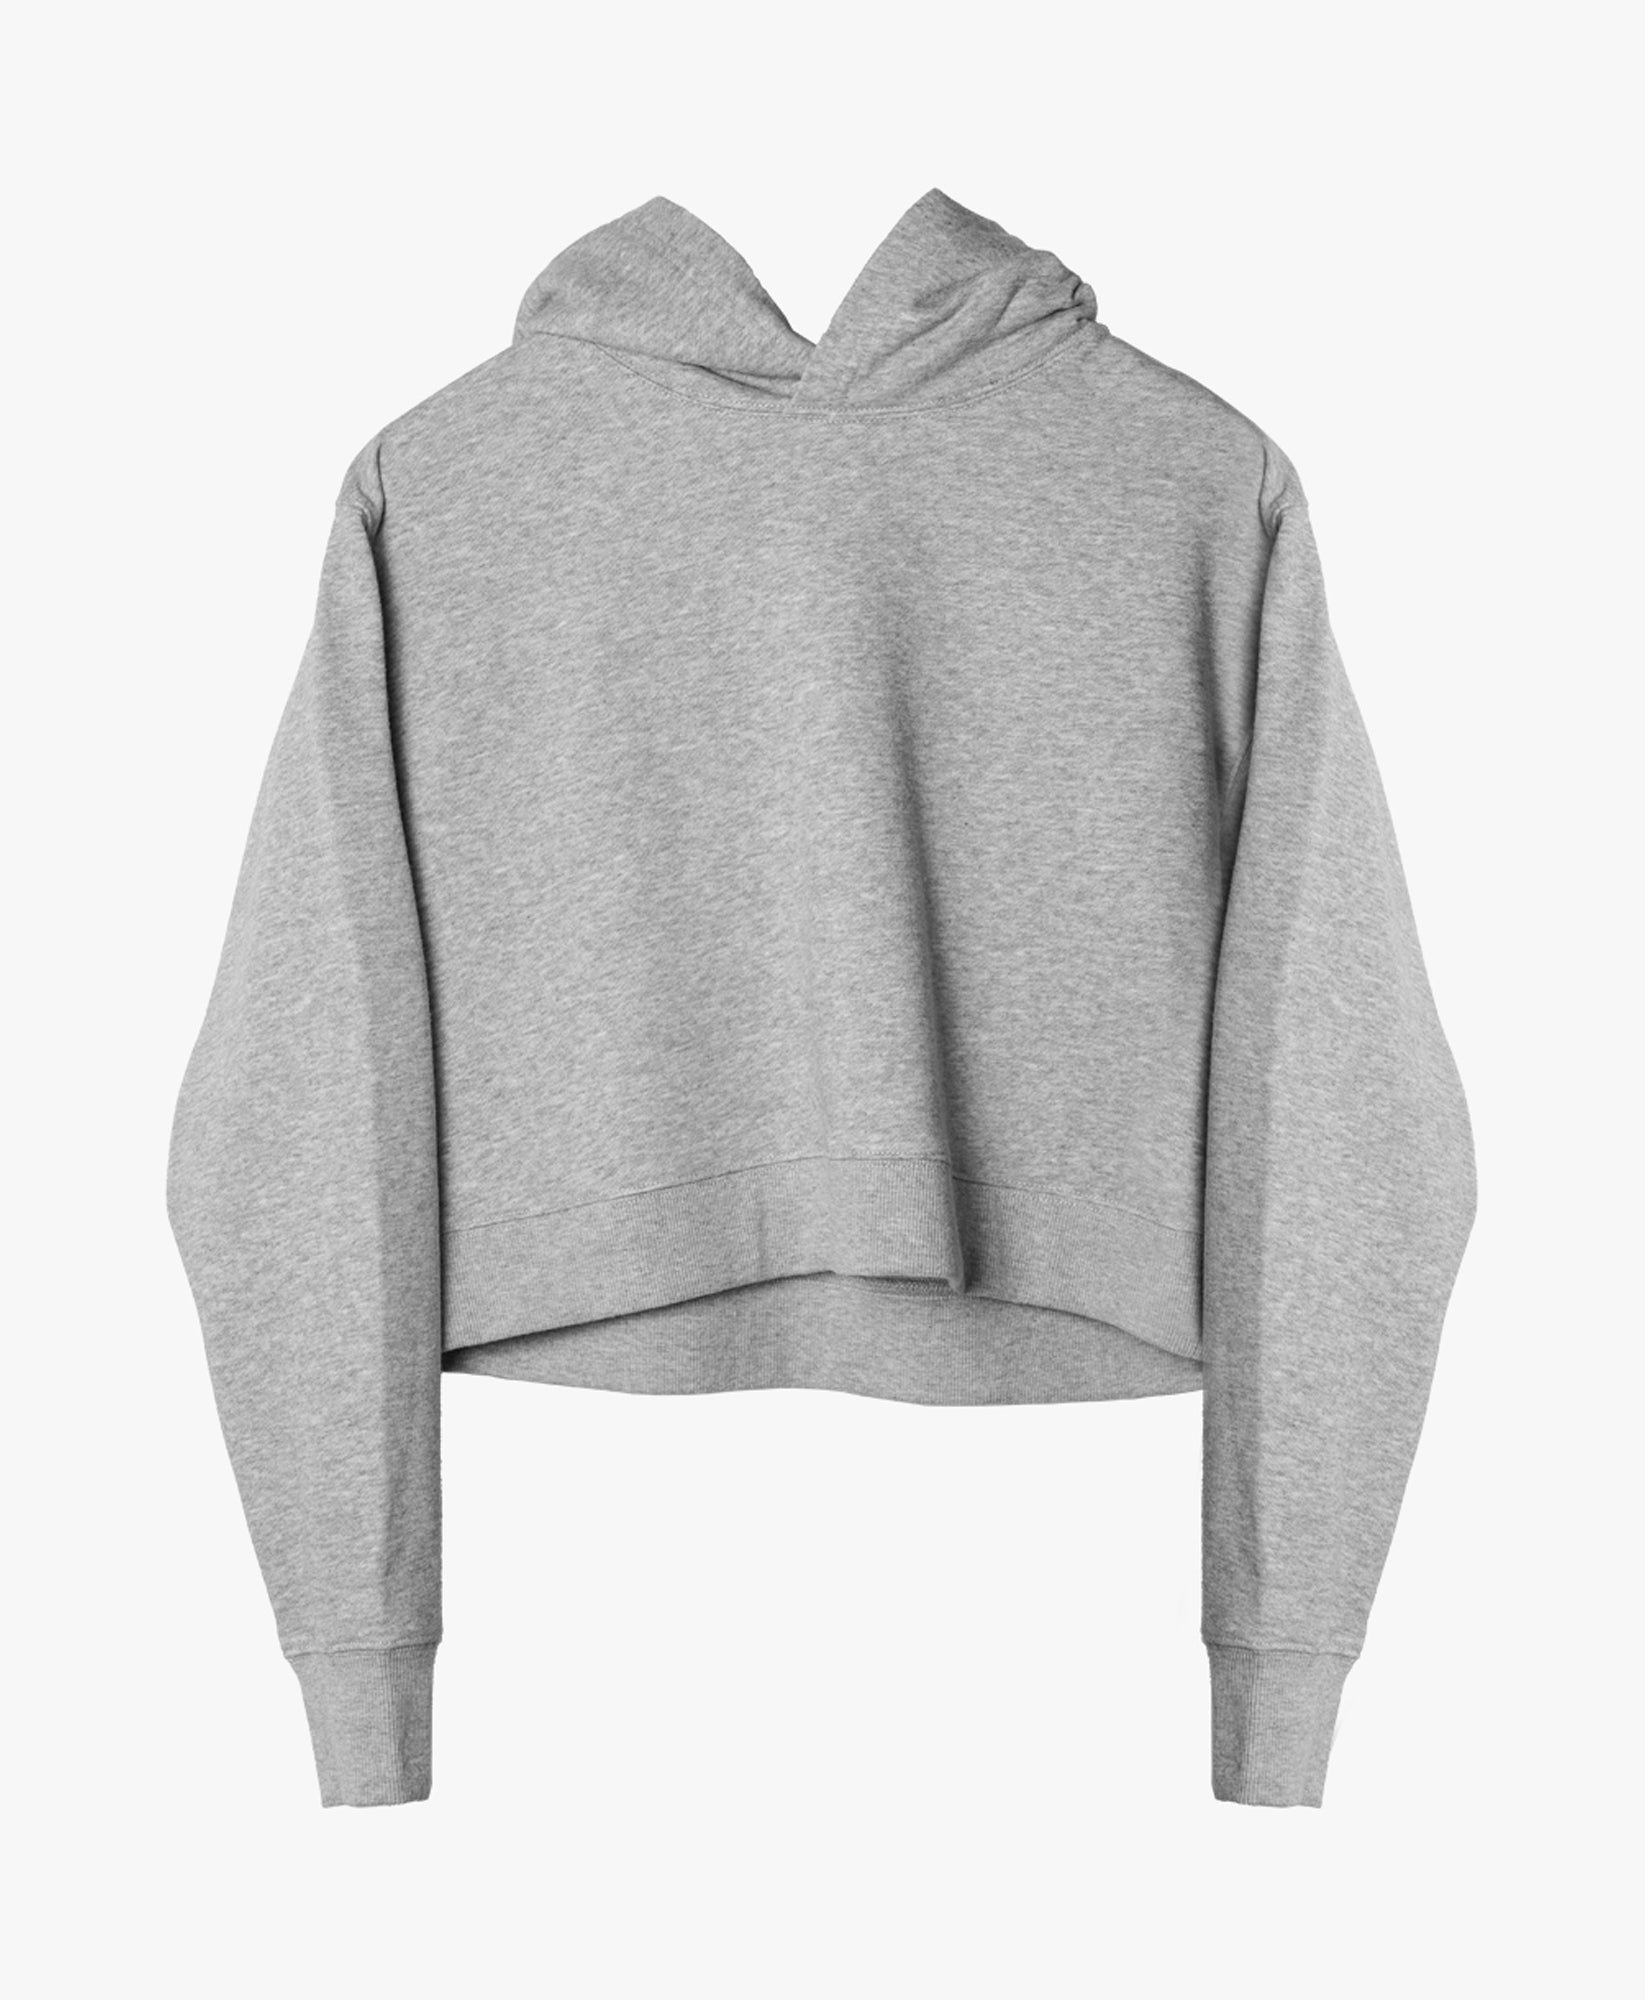 Wear One's At French Terry Cropped Hoodie in Sport Grey on Model Side View